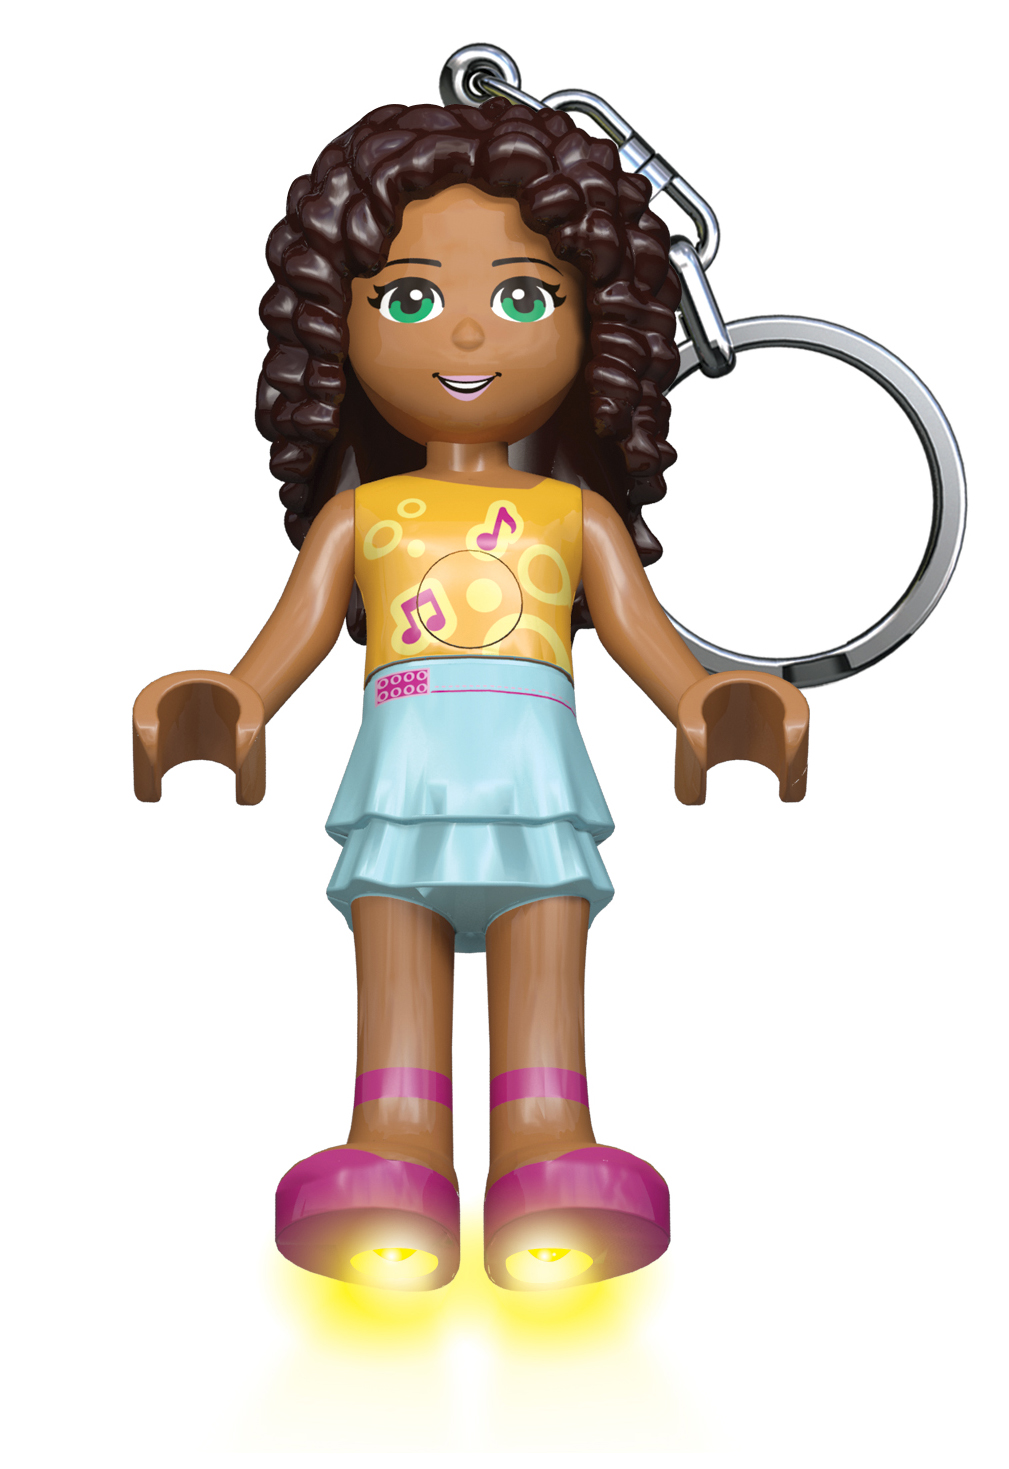 LEGO Friends Andrea Keychain with LED Light, 2.75-Inch - image 3 of 3